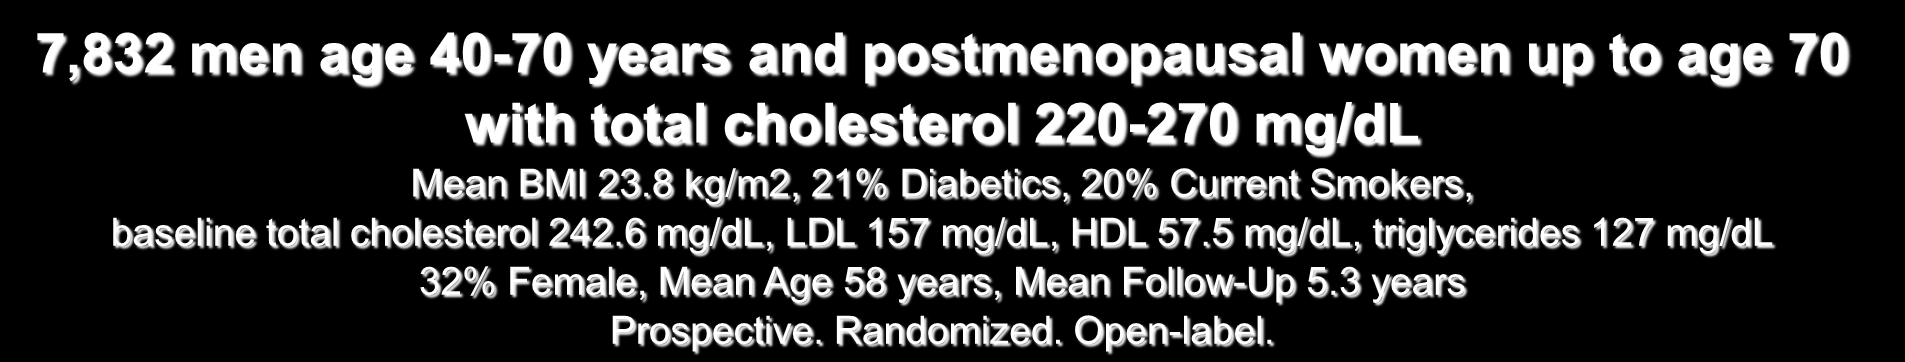 MEGA Trial 7,832 men age 40-70 years and postmenopausal women up to age 70 with total cholesterol 220-270 mg/dl Mean BMI 23.8 kg/m2, 21% Diabetics, 20% Current Smokers, baseline total cholesterol 242.